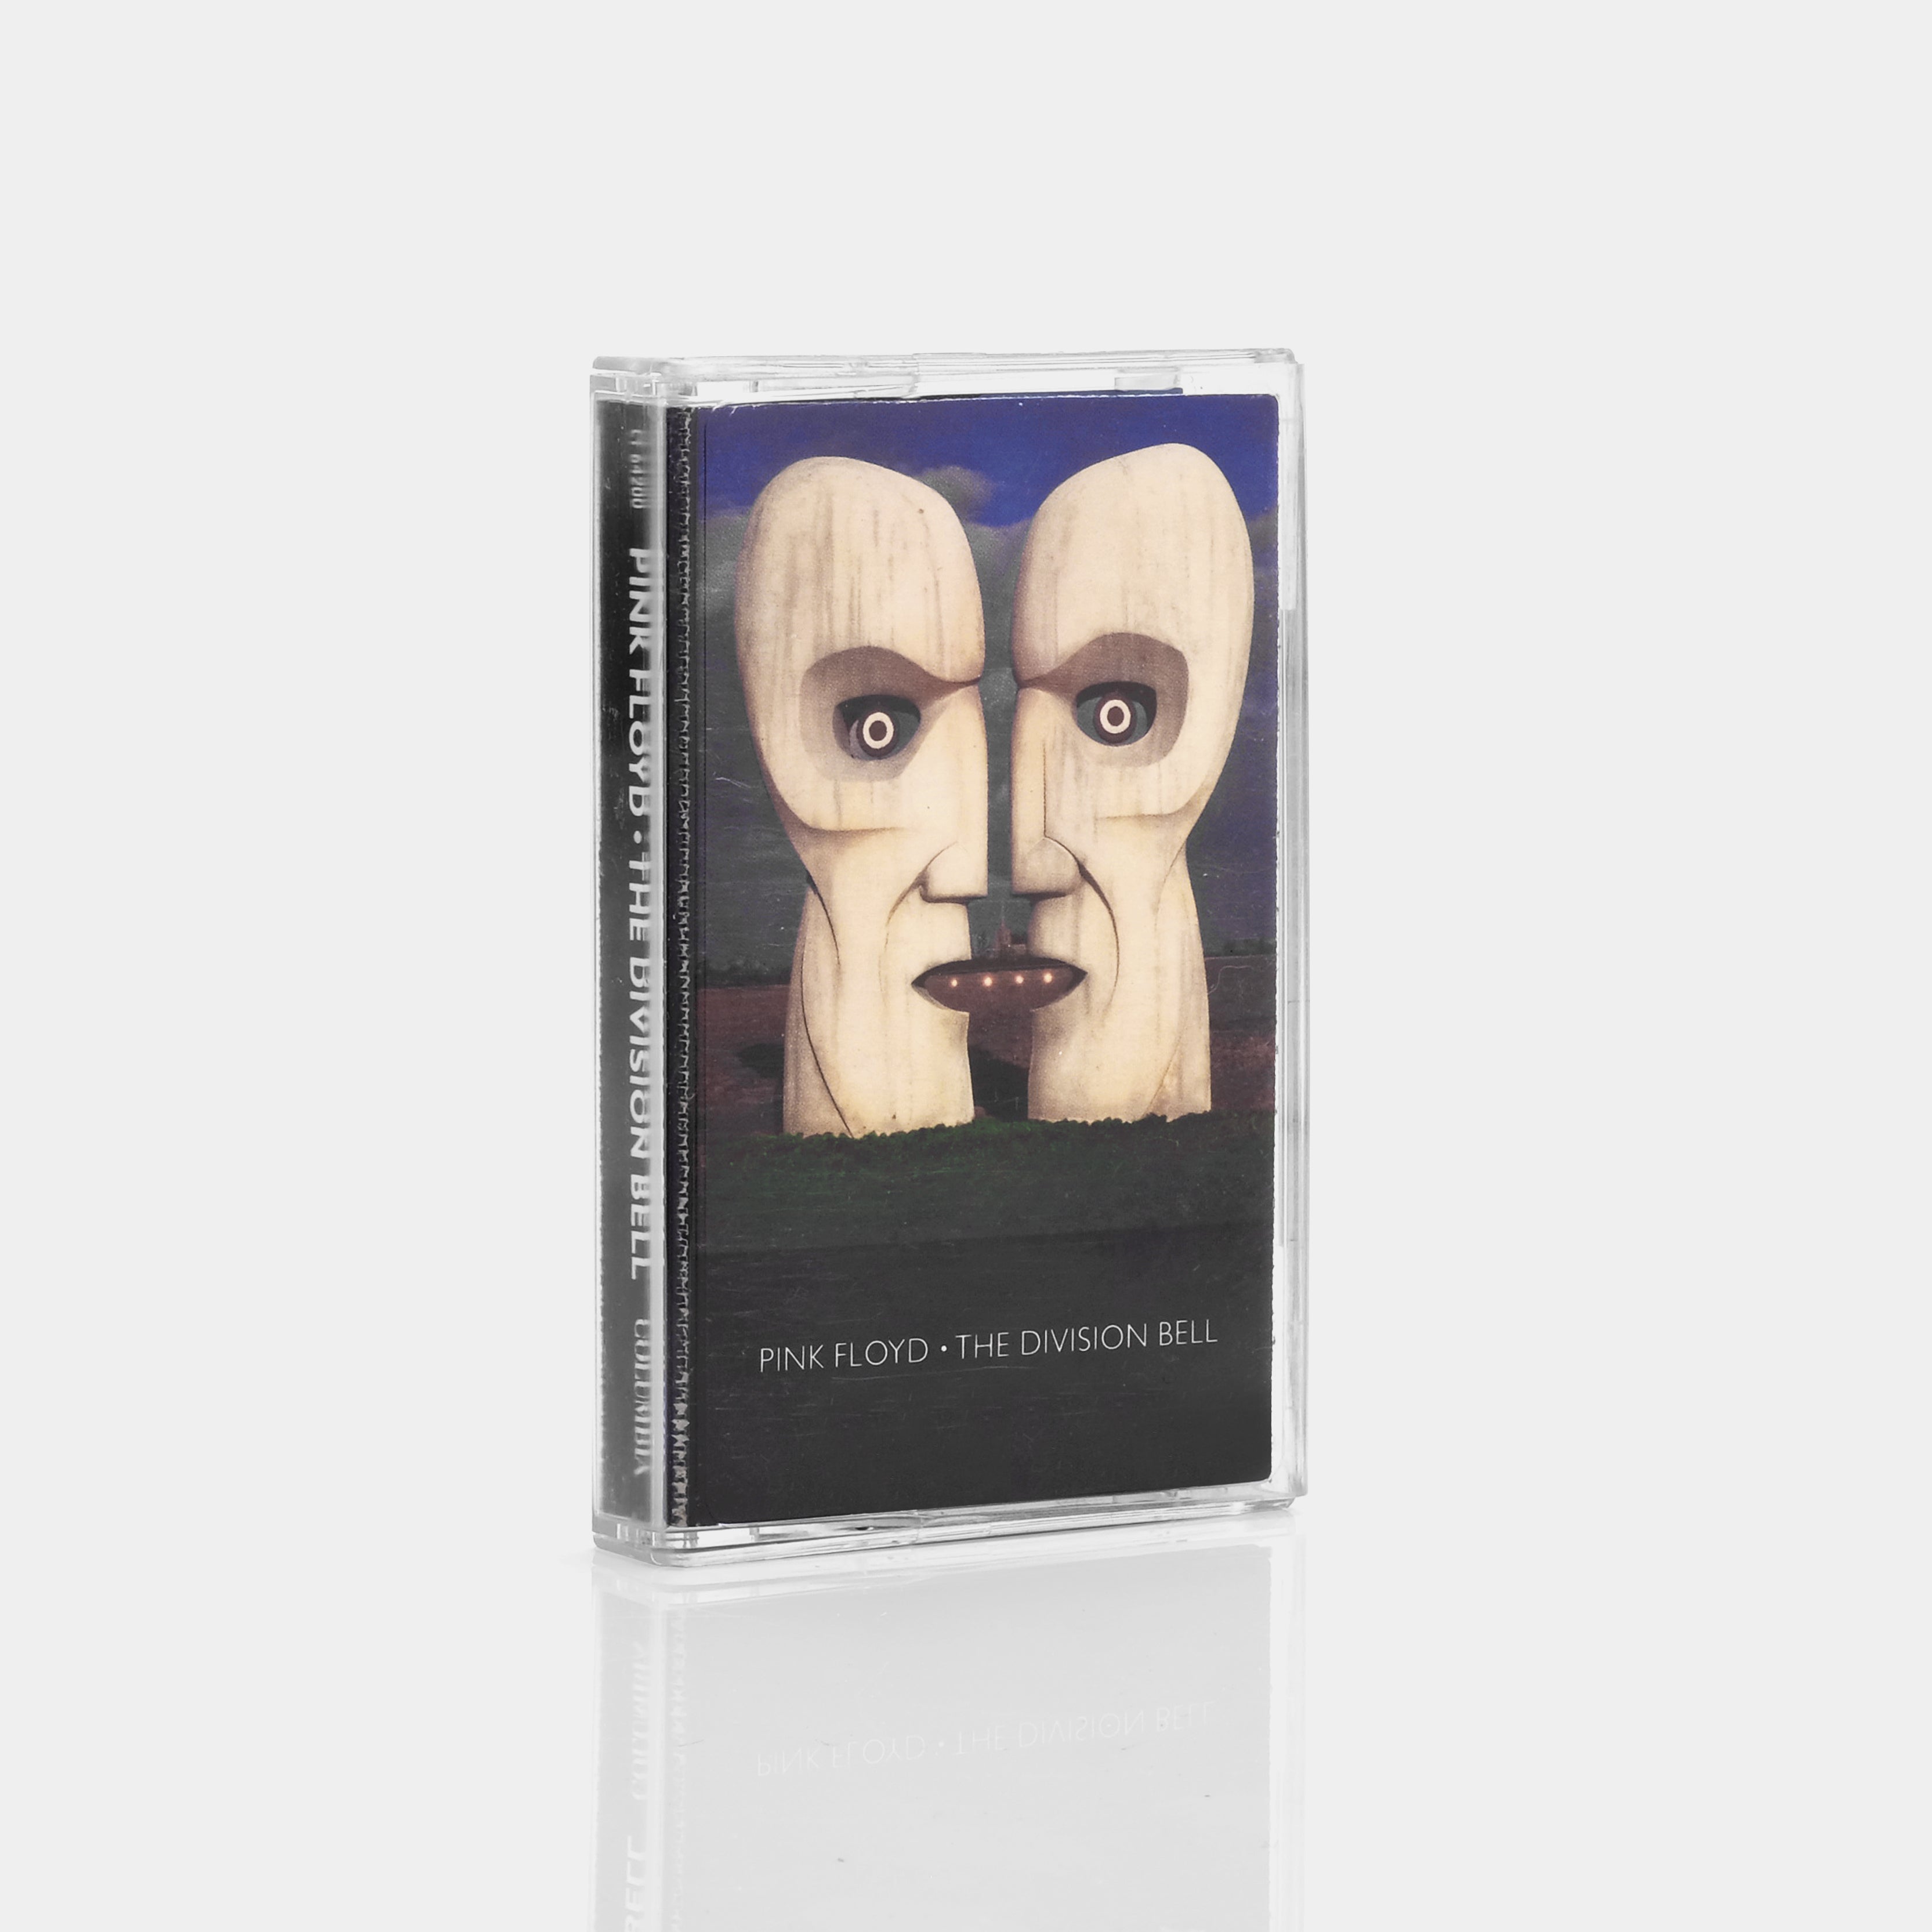 Pink Floyd - The Division Bell Cassette Tape